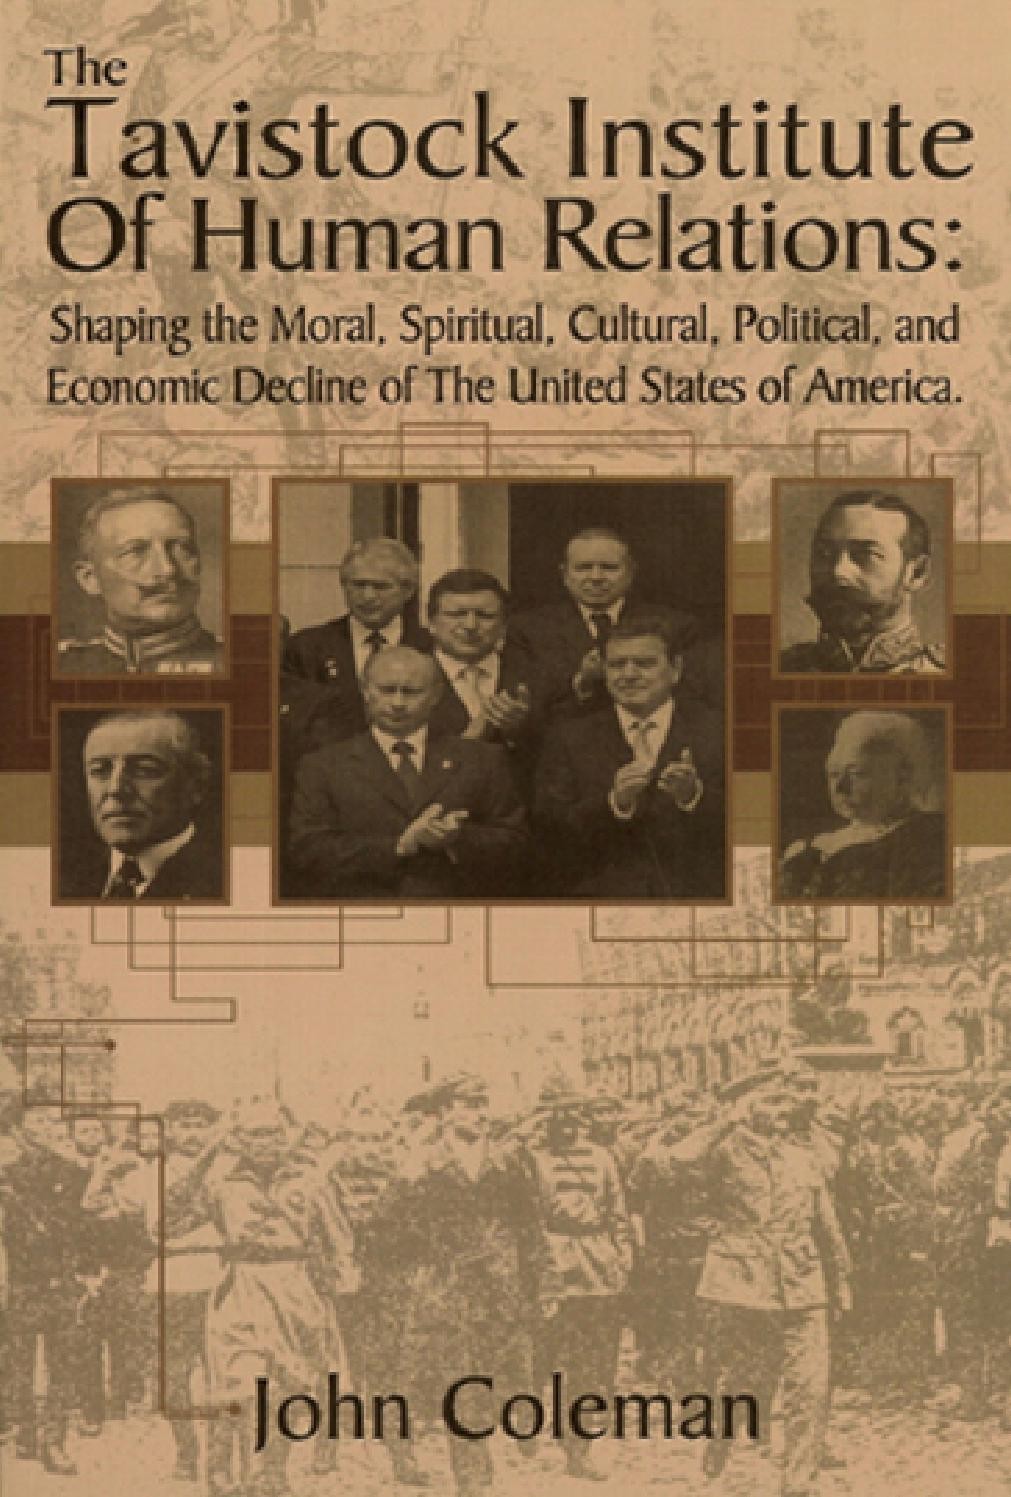 The Tavistock Institute Of Human Relations: Shaping the Moral, Spiritual, Cultural, and Political and Economic Decline of the United States of America